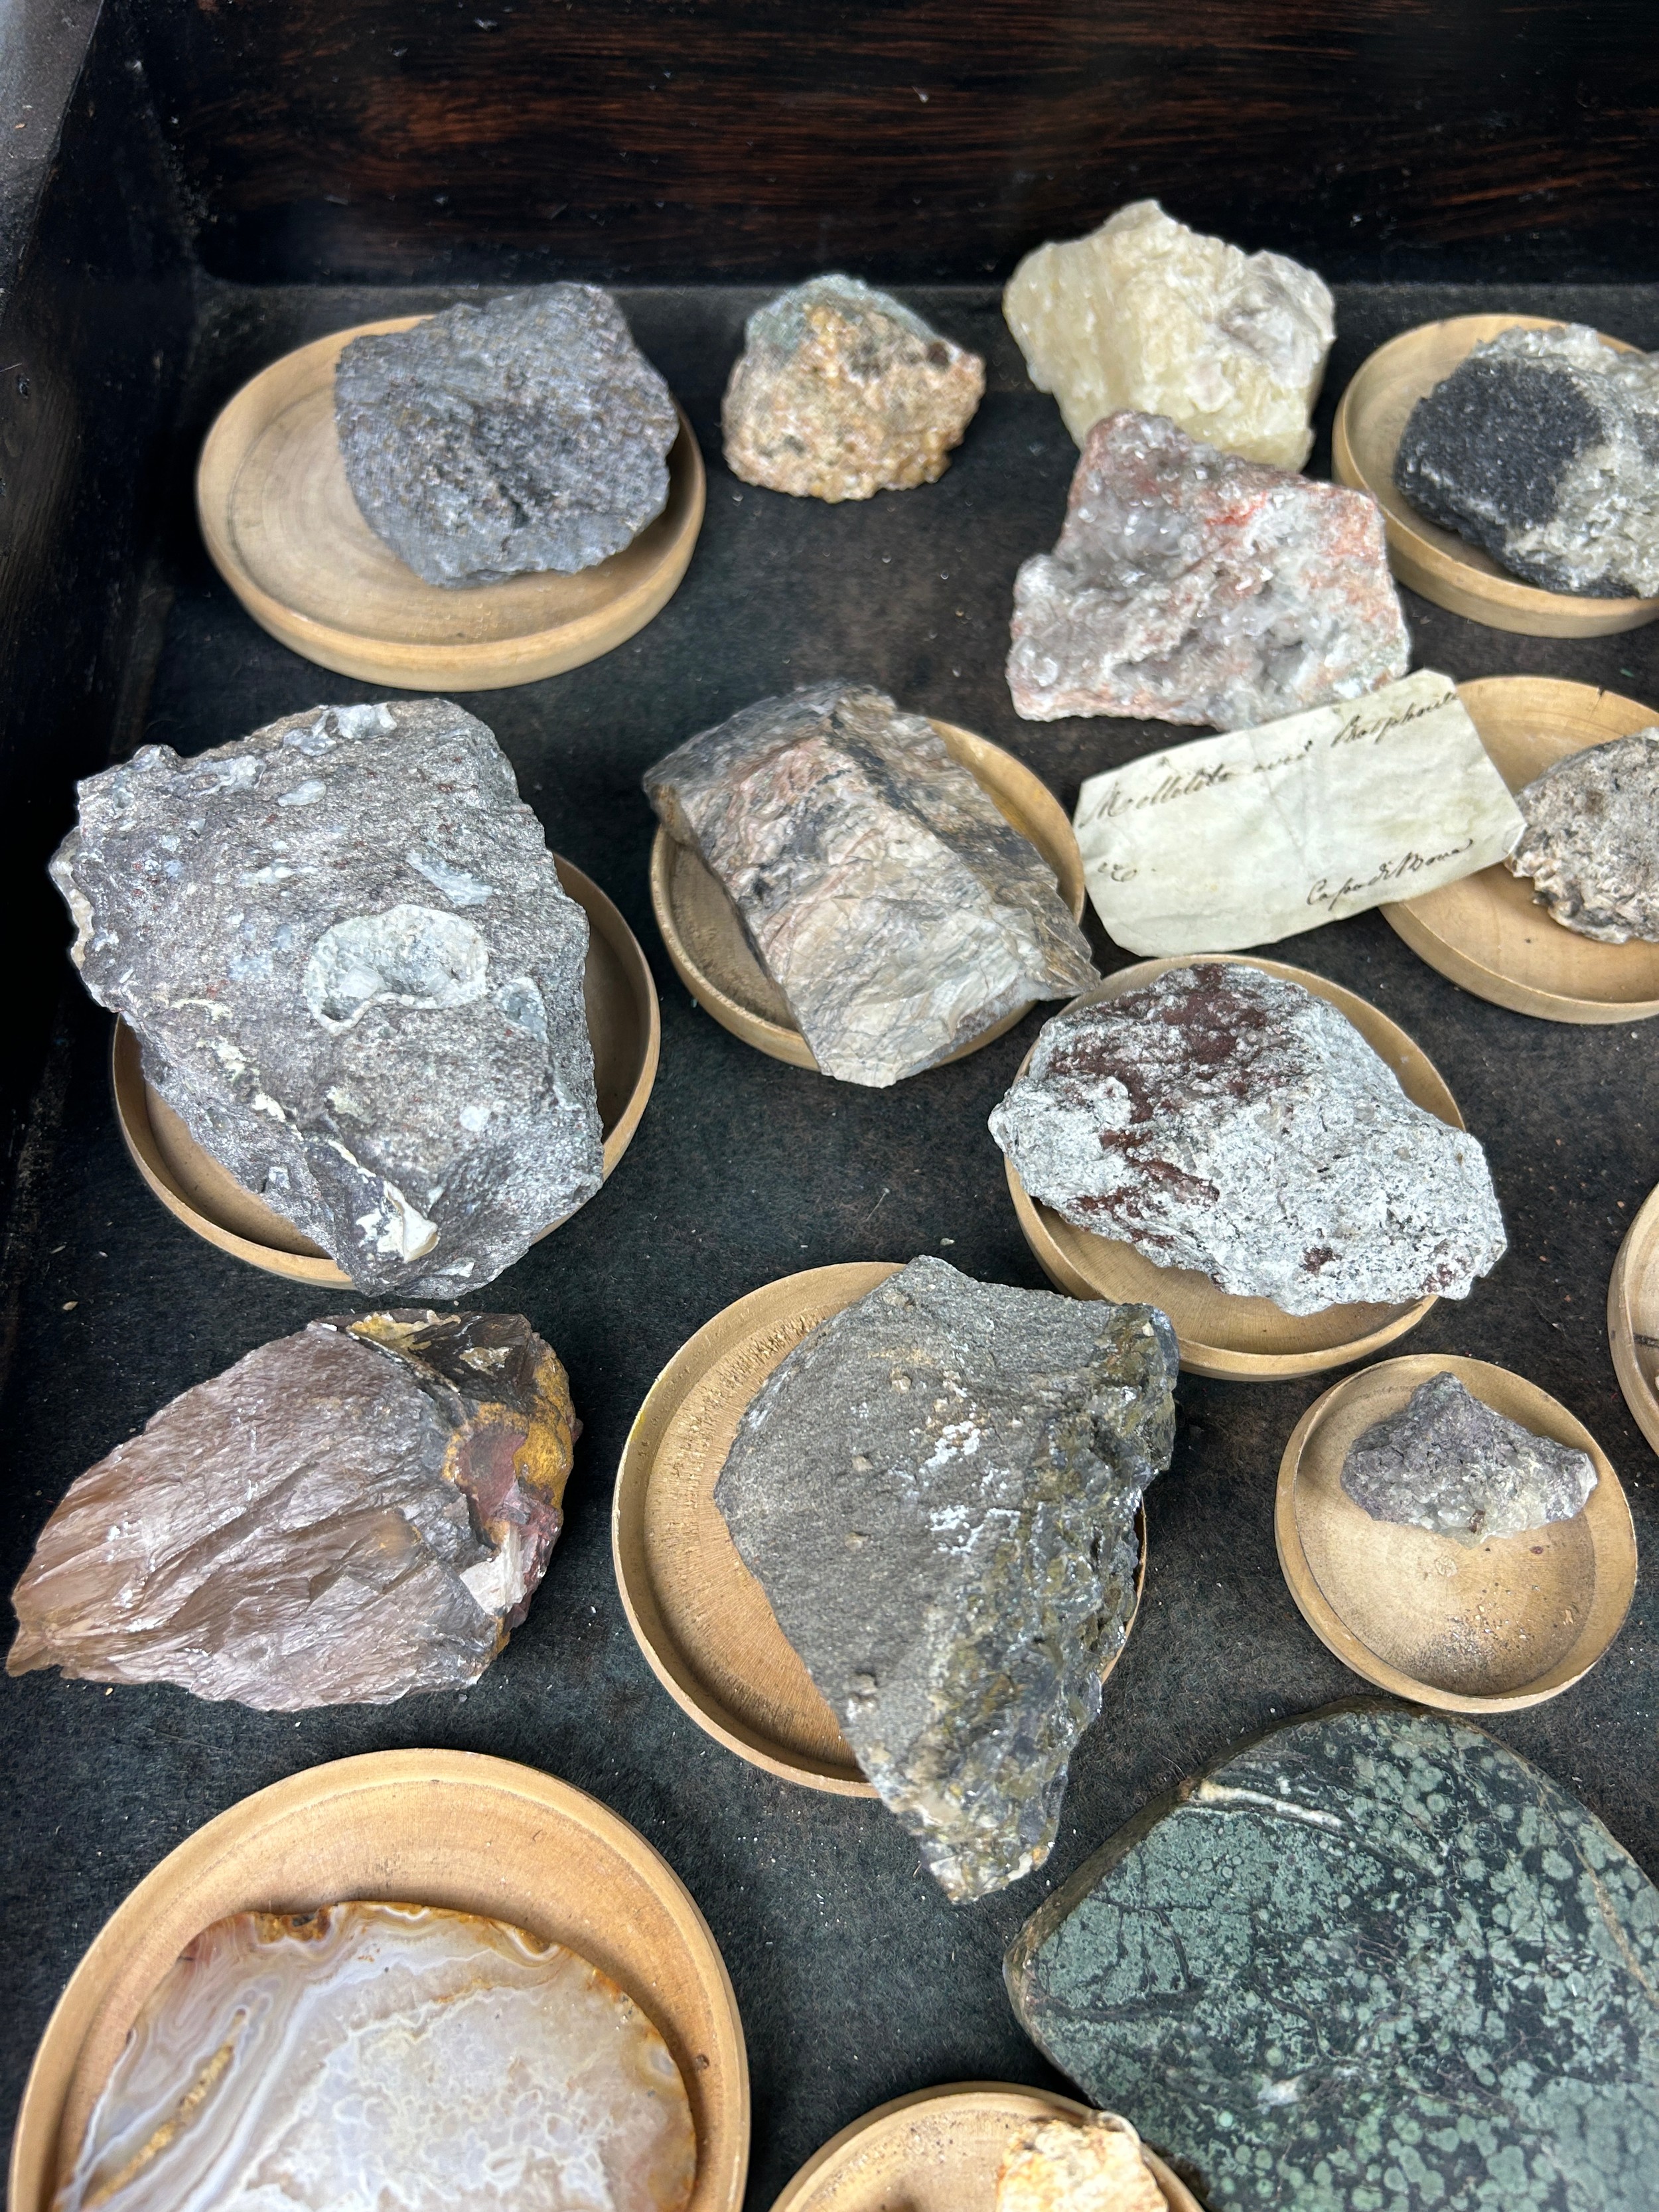 A RARE CABINET COLLECTION OF MINERALS CIRCA 1810-1860, including minerals probably collected by - Image 25 of 33